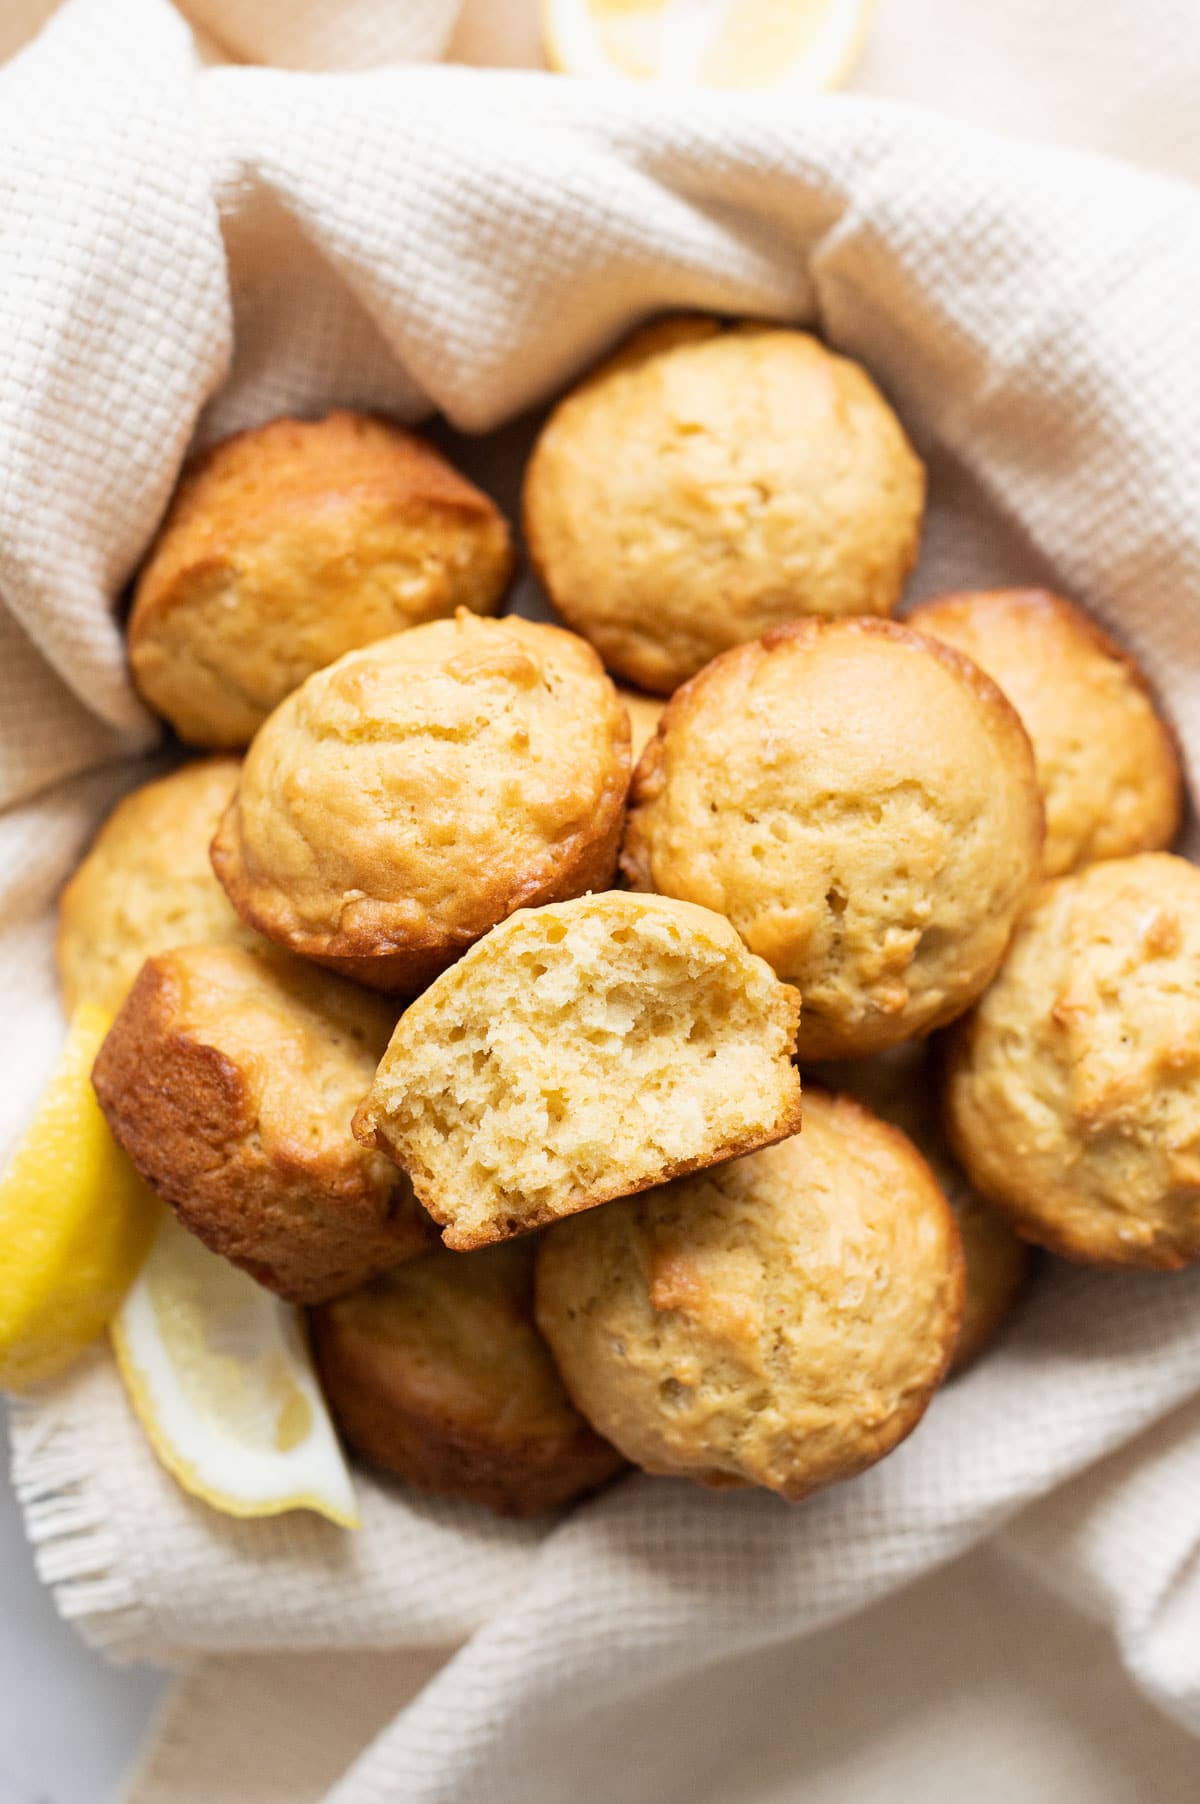 Close up photo showing texture of inside of a lemon muffin in a basket with other lemon muffins.